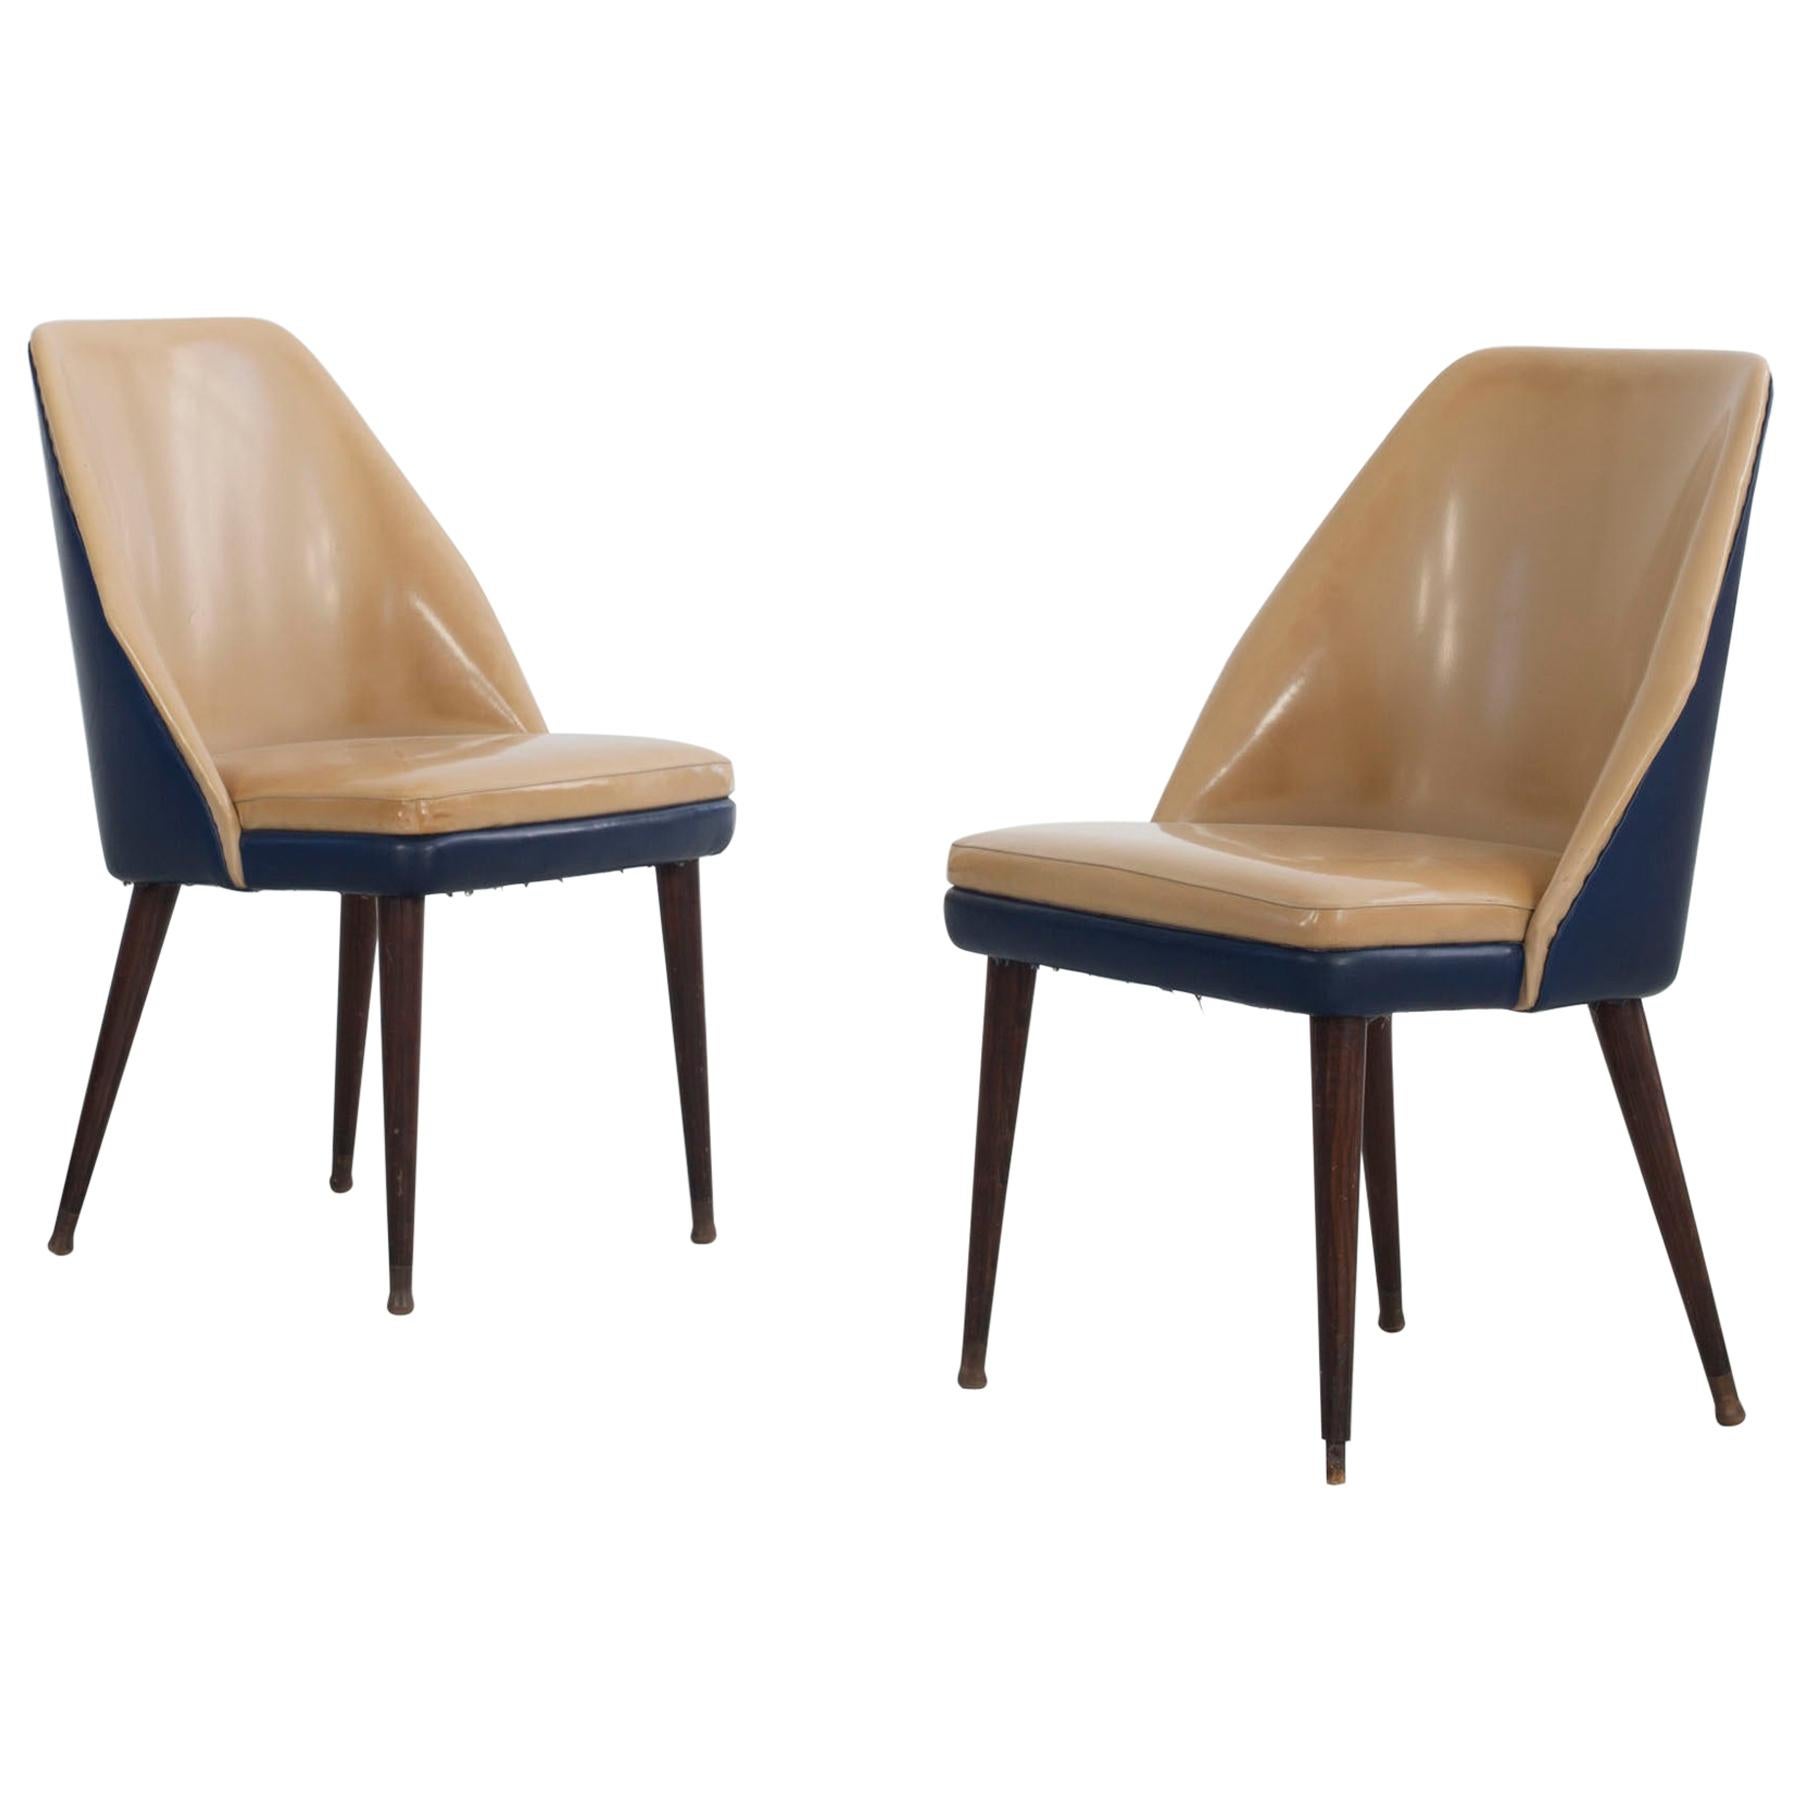 Set of 2 Italian Sidechairs in Two-Tone Original Vipla Covering, Cassina, 1950s